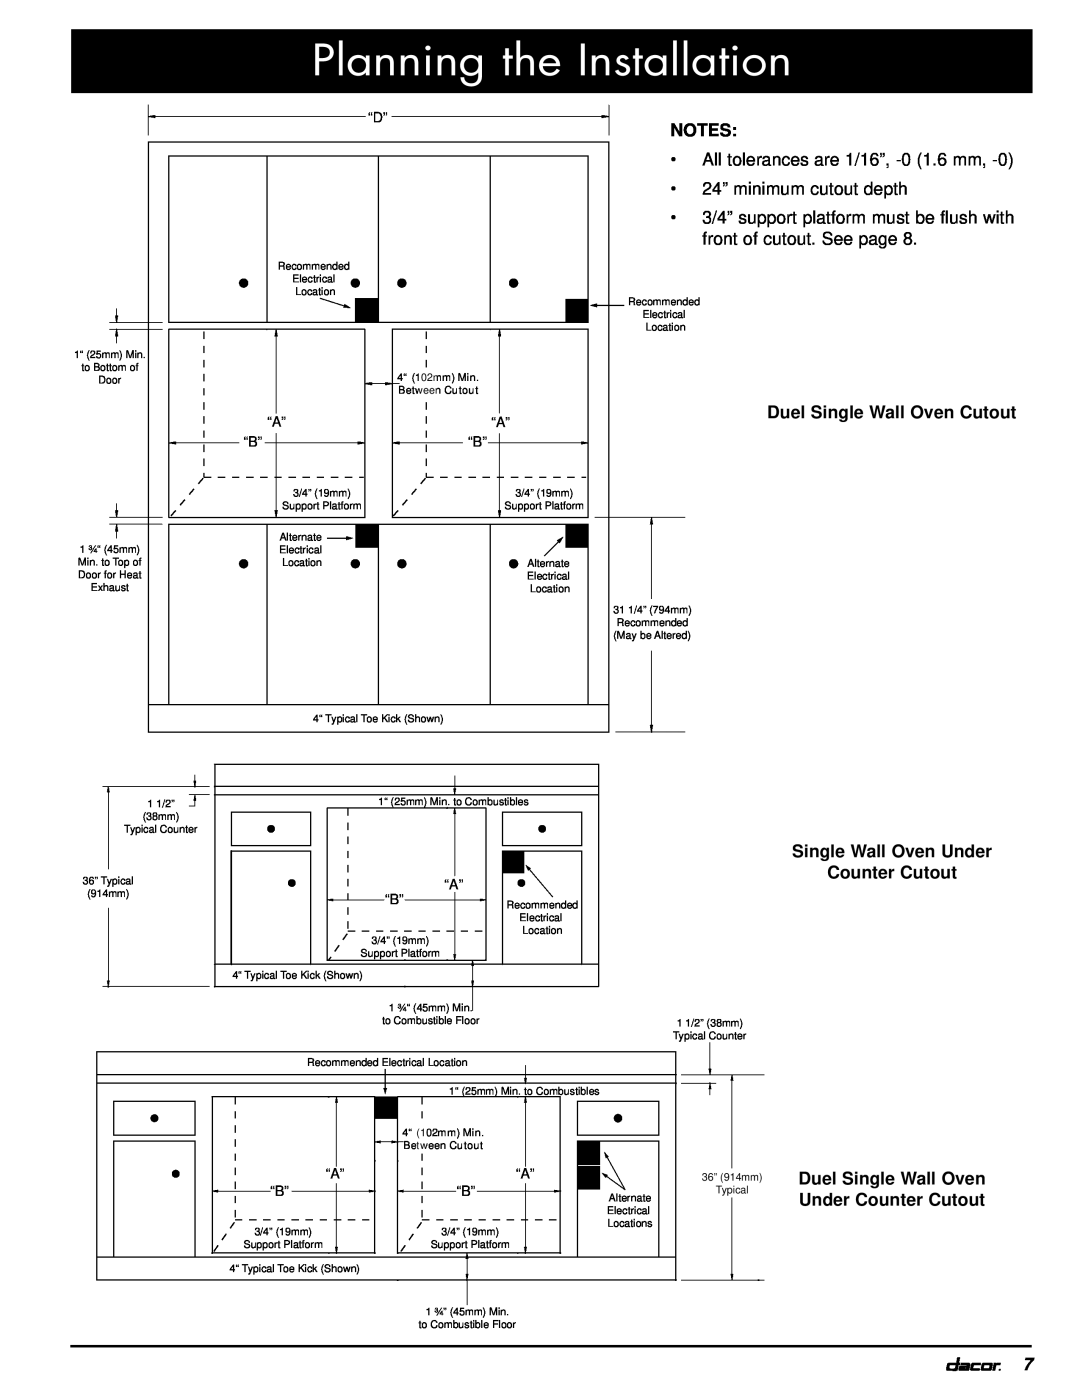 Dacor MOH230, MOV230 Planning the Installation, Duel Single Wall Oven, 4“ 102mm Min, Between Cutout 